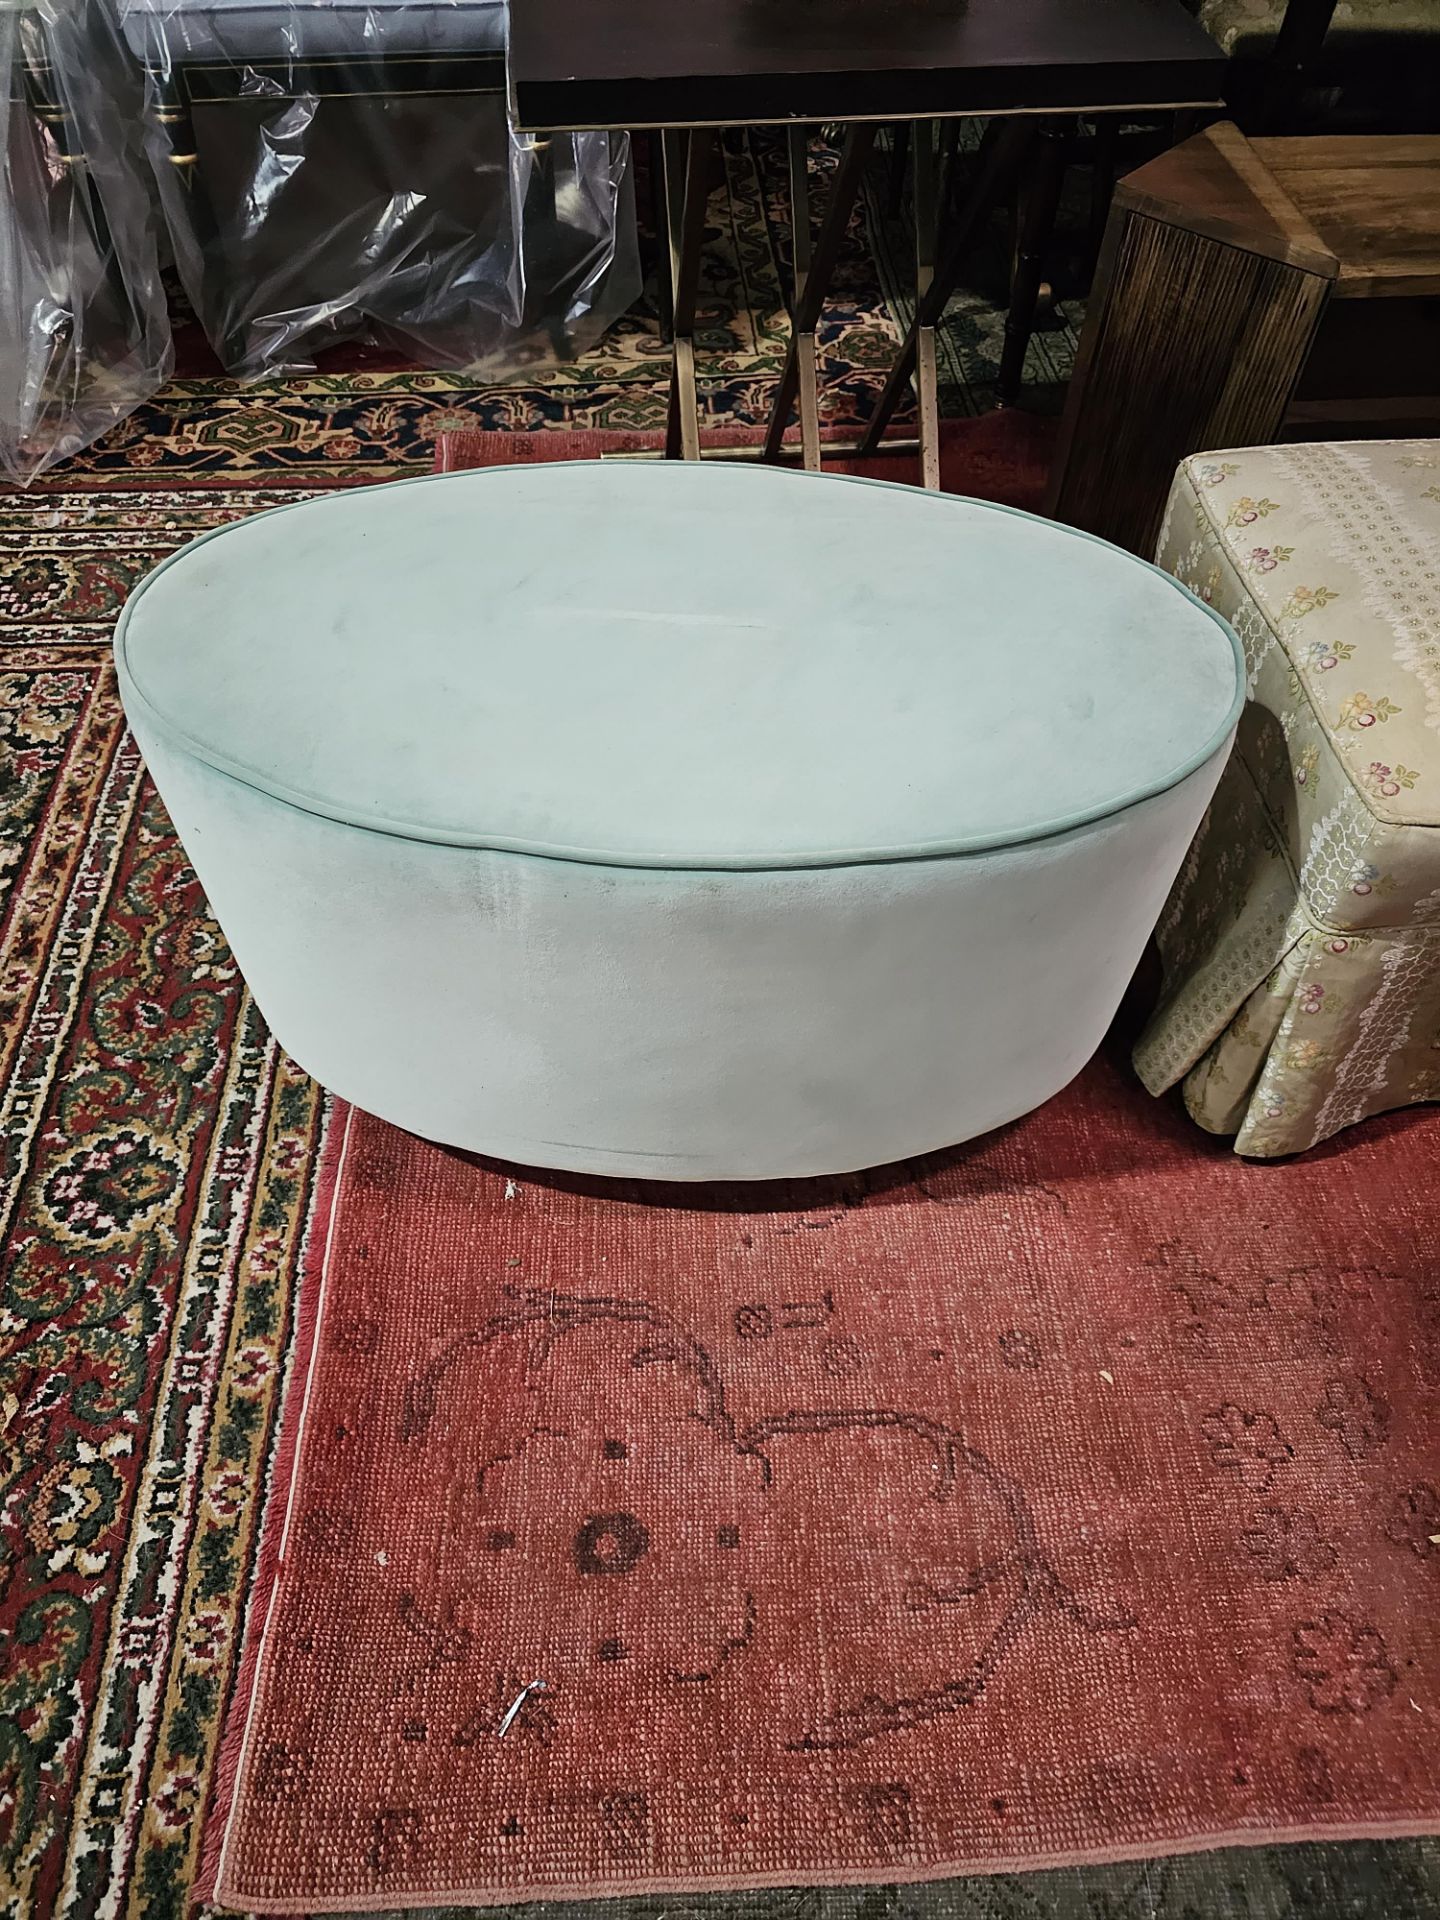 Velvet Ovoid Mint Foot Stool Small Damage To Base 80 x 45 x 46cm (ST17) This Item Is Either - Image 2 of 3